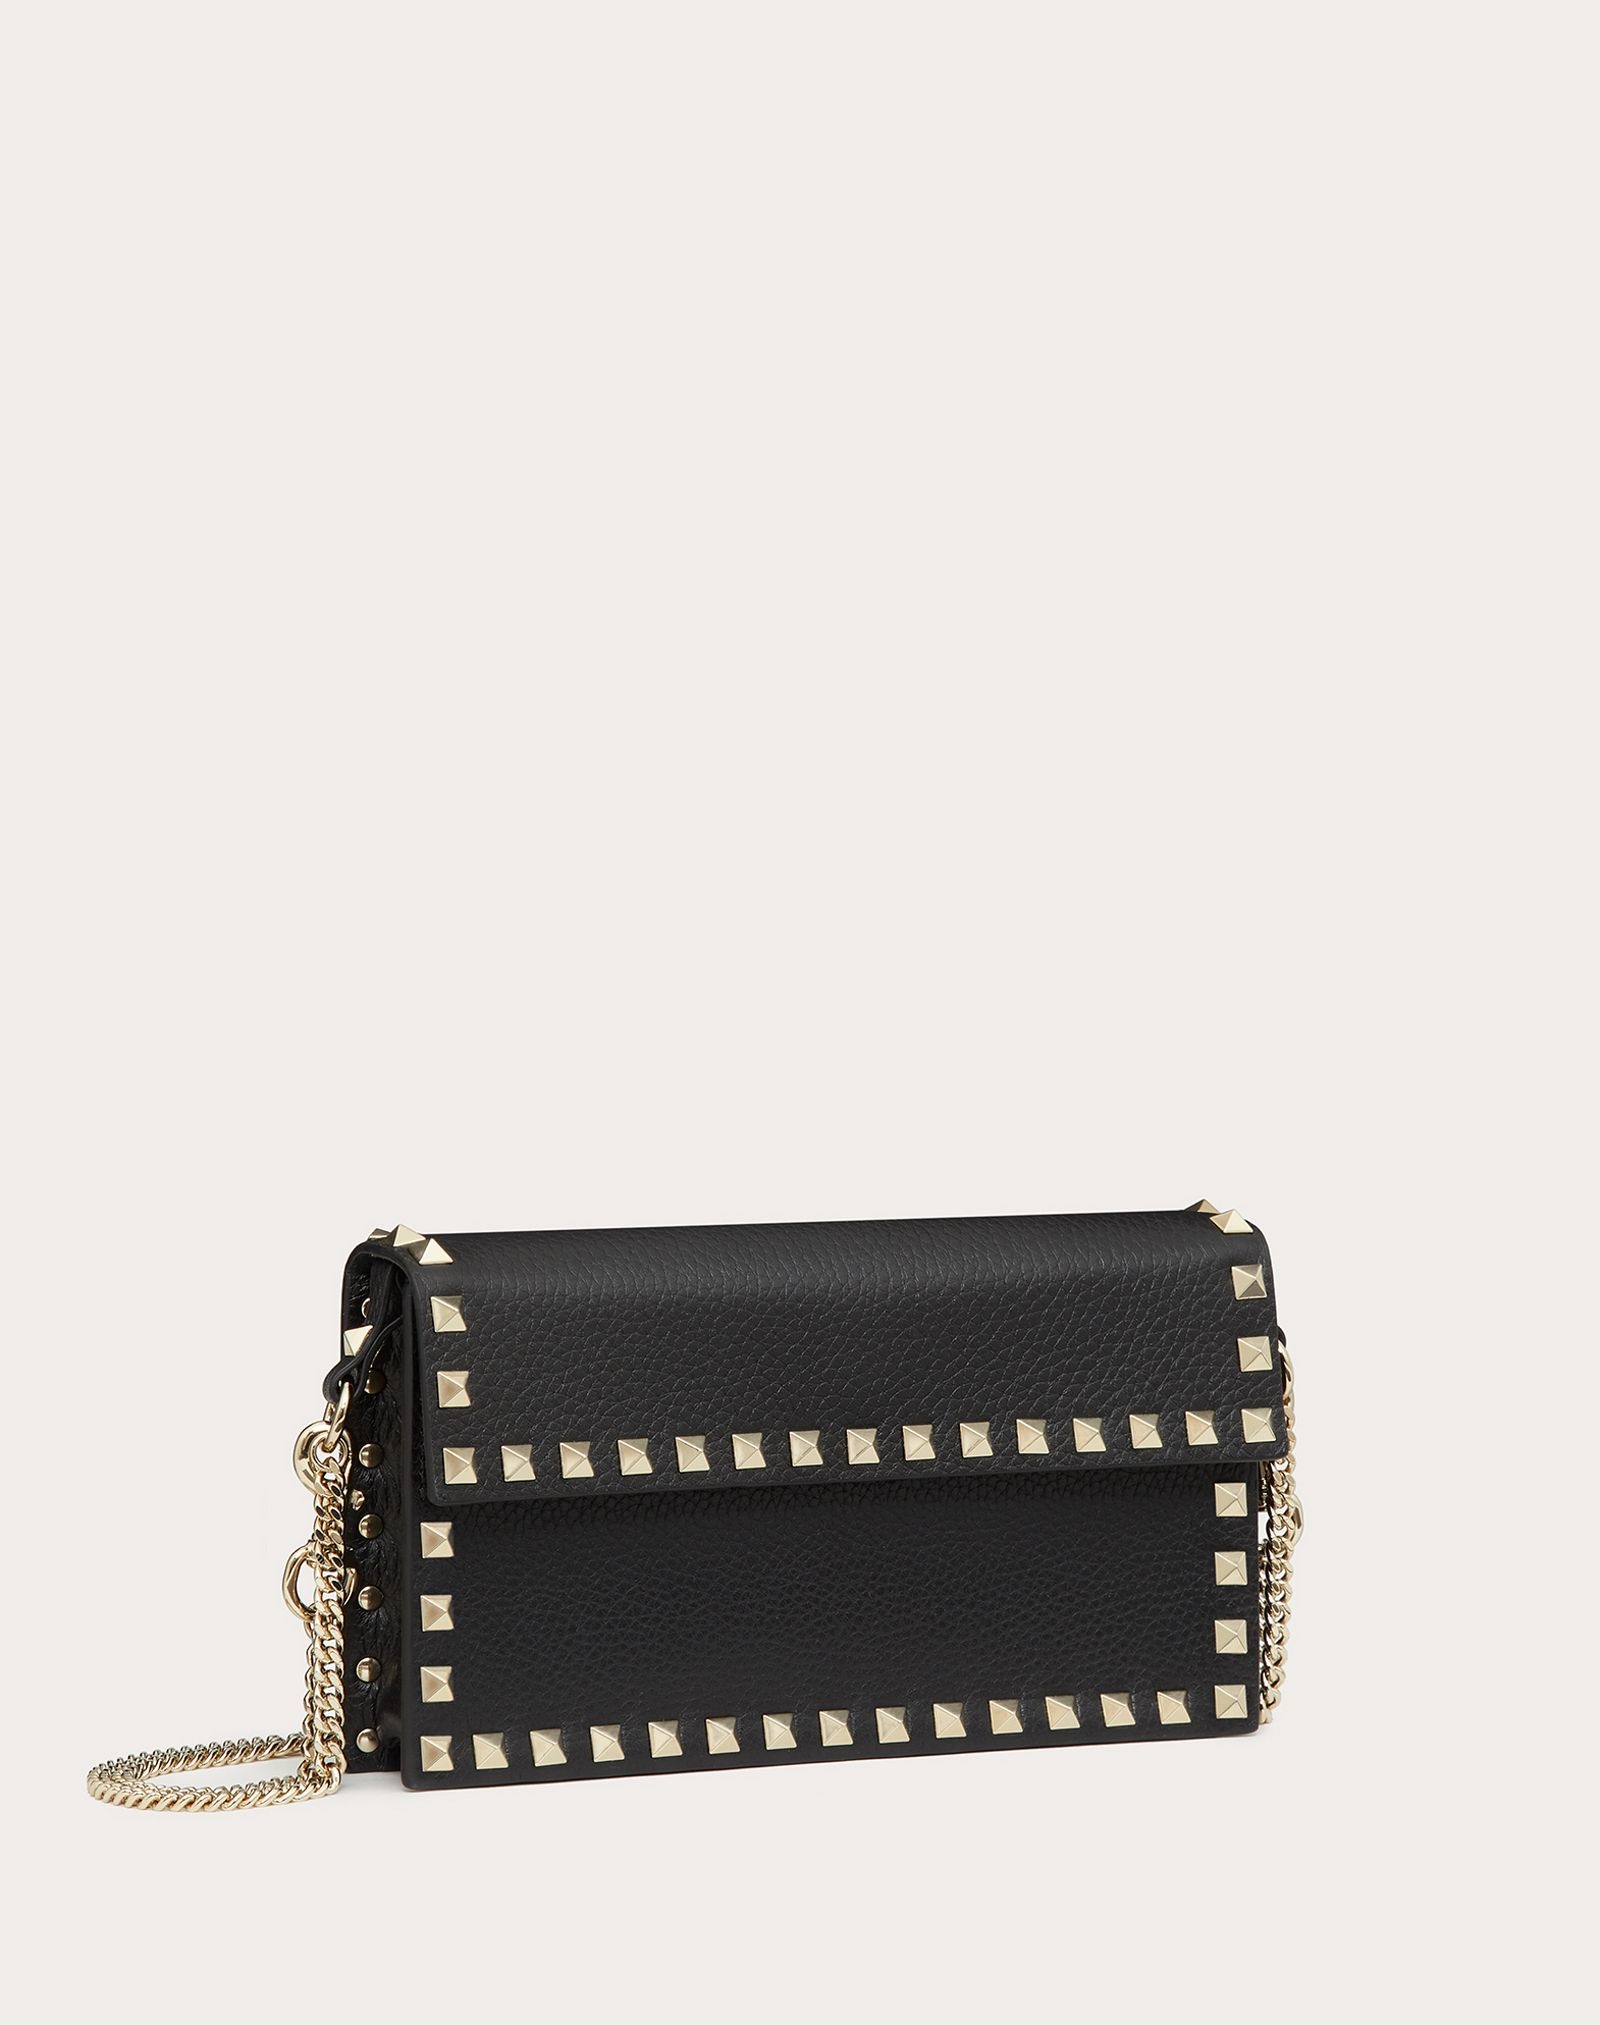 ROCKSTUD GRAINY CALFSKIN POUCH WITH ADJUSTABLE CHAIN STRAP - 4